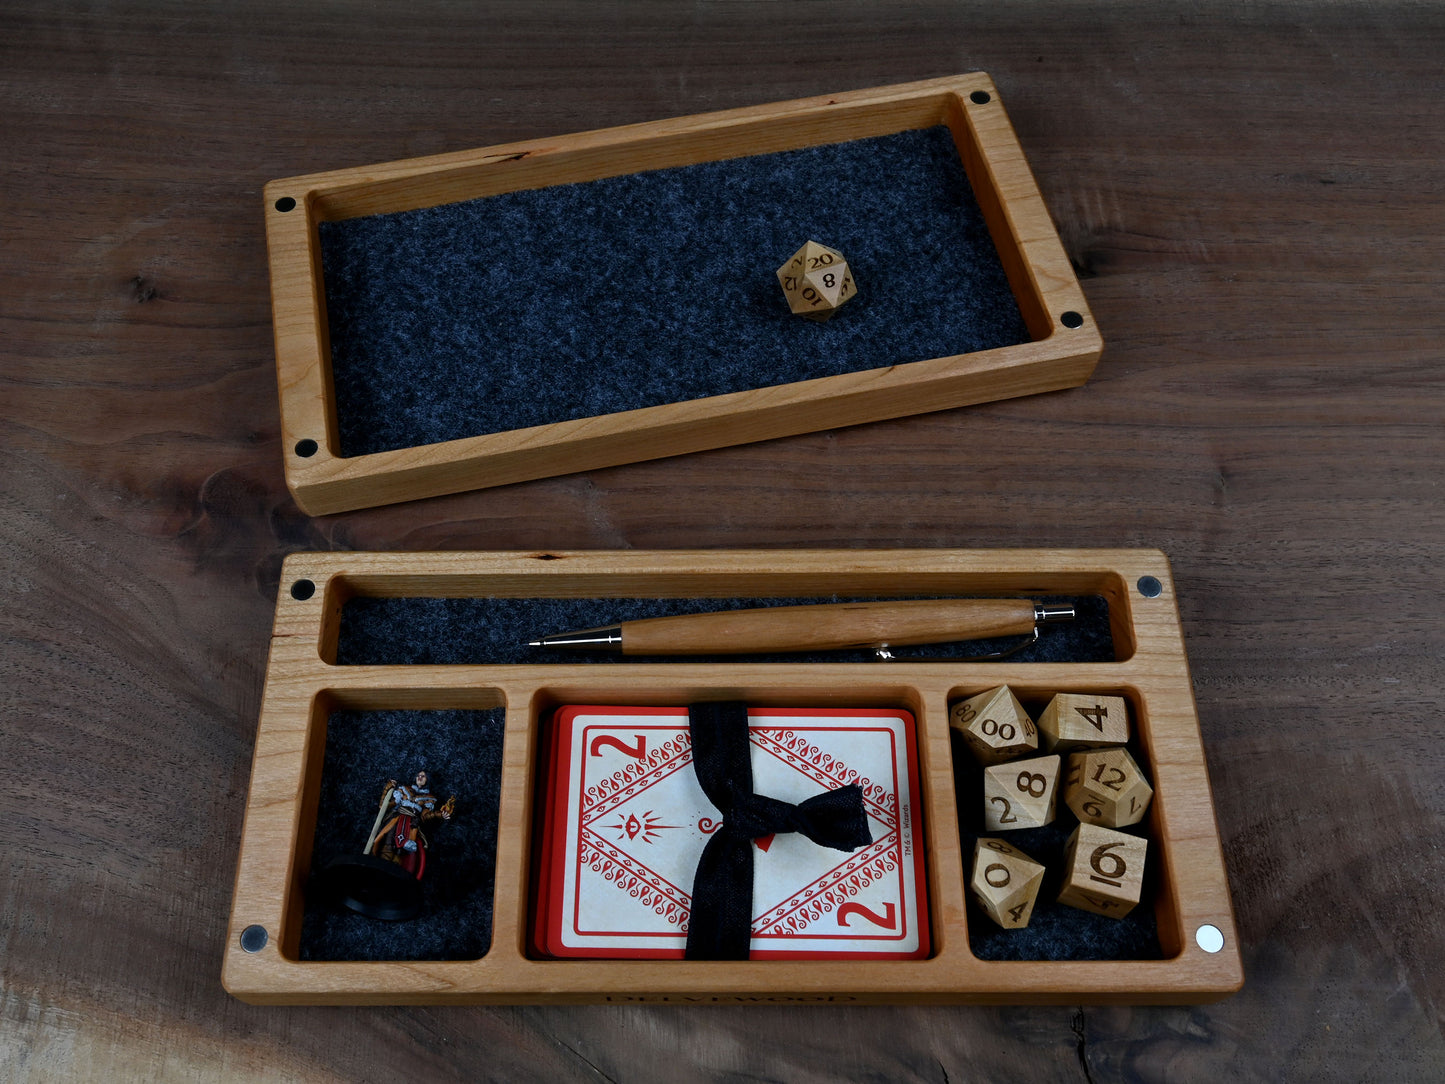 Cherry wood Delver's kit dice box and tray for dnd rpg dungeons and dragons